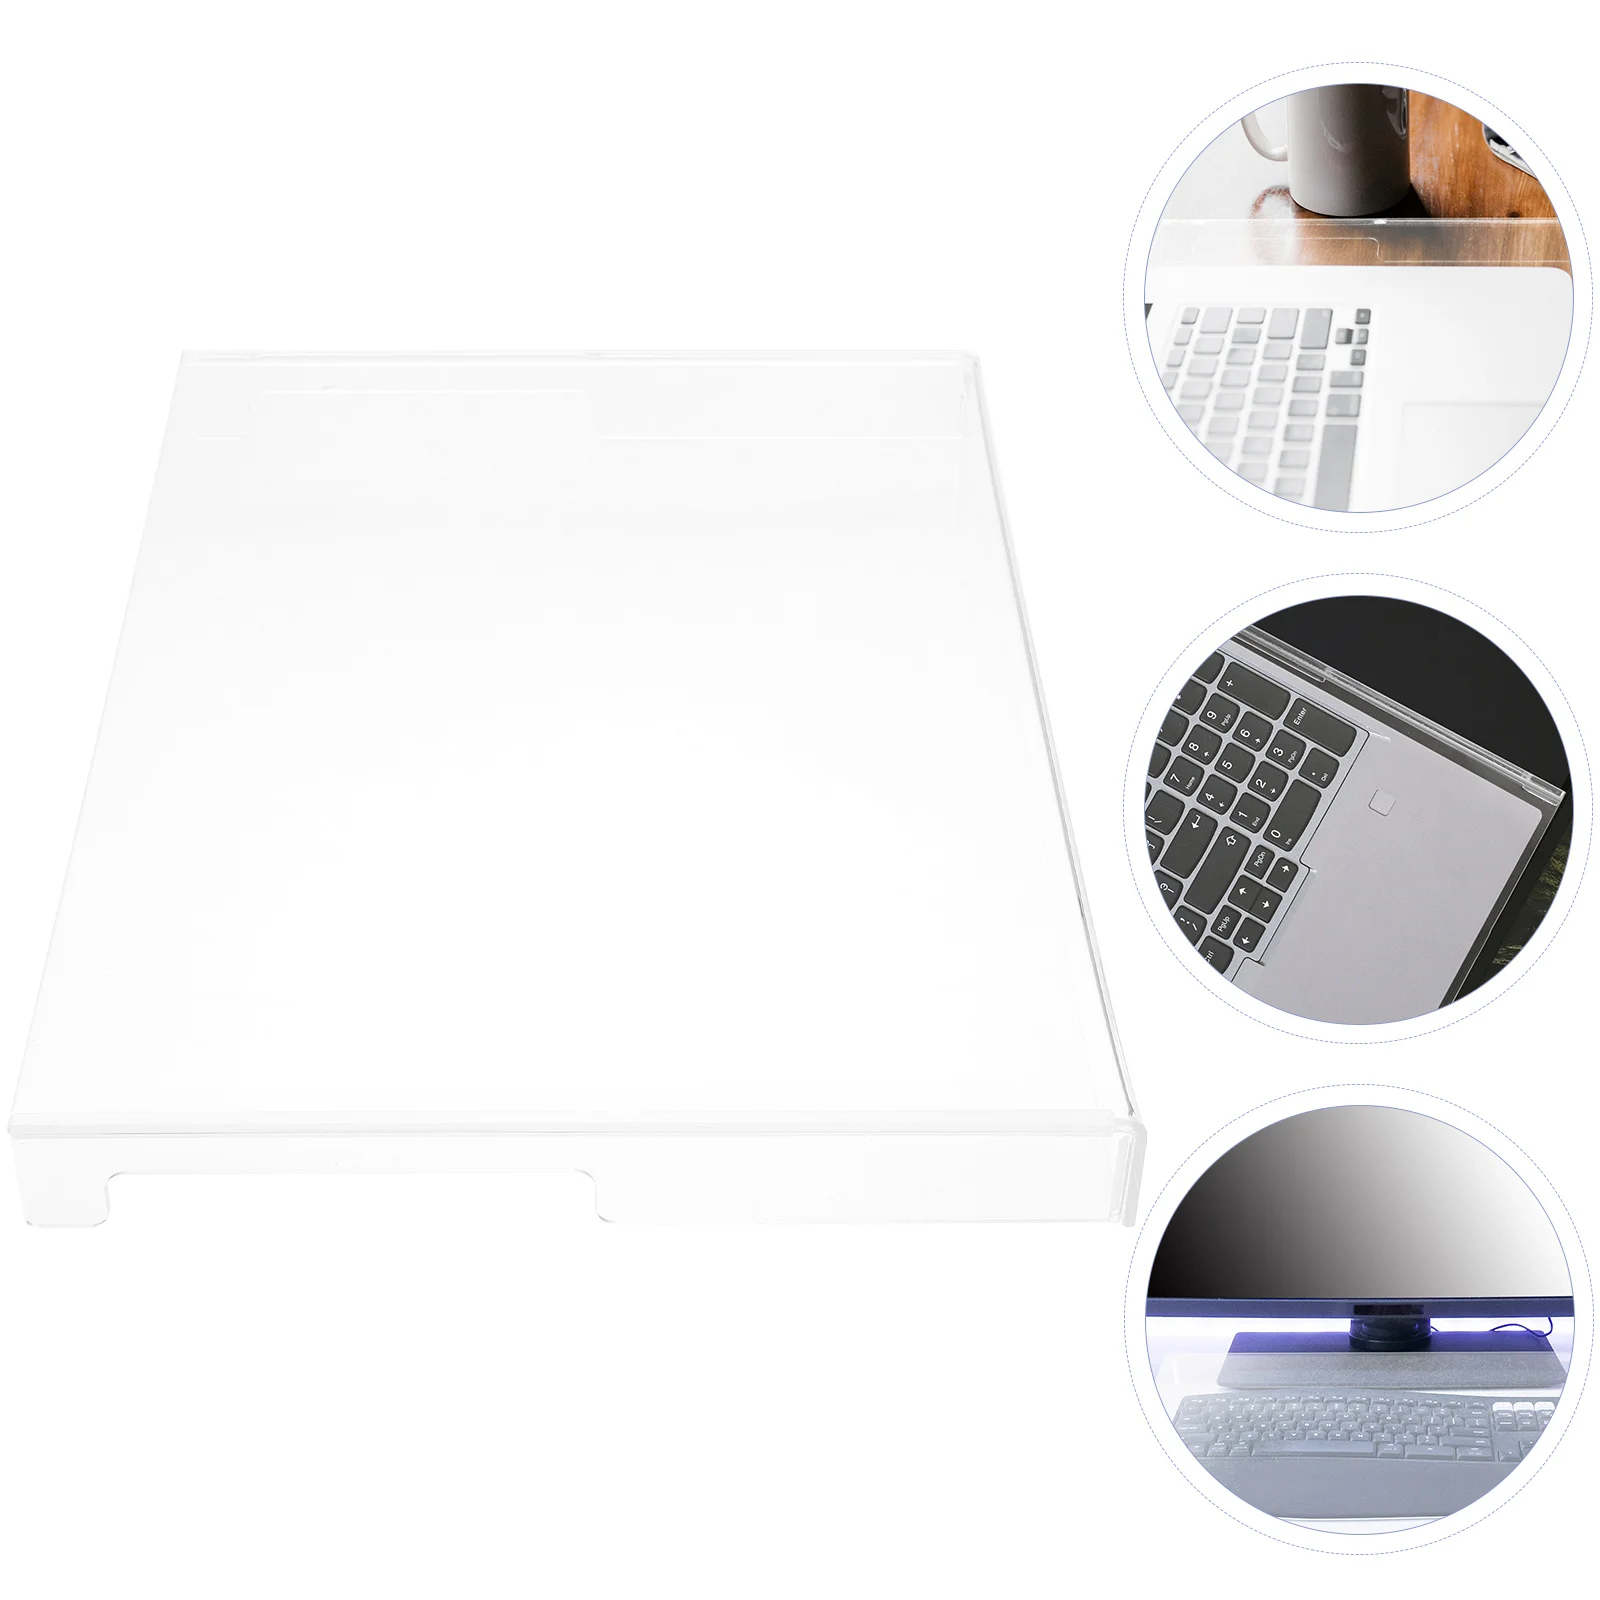 Keyboard Dust Cover Accessory Computer Mouse Clear Covers Shield Desk Protector Dust-proof Household Case Versatile